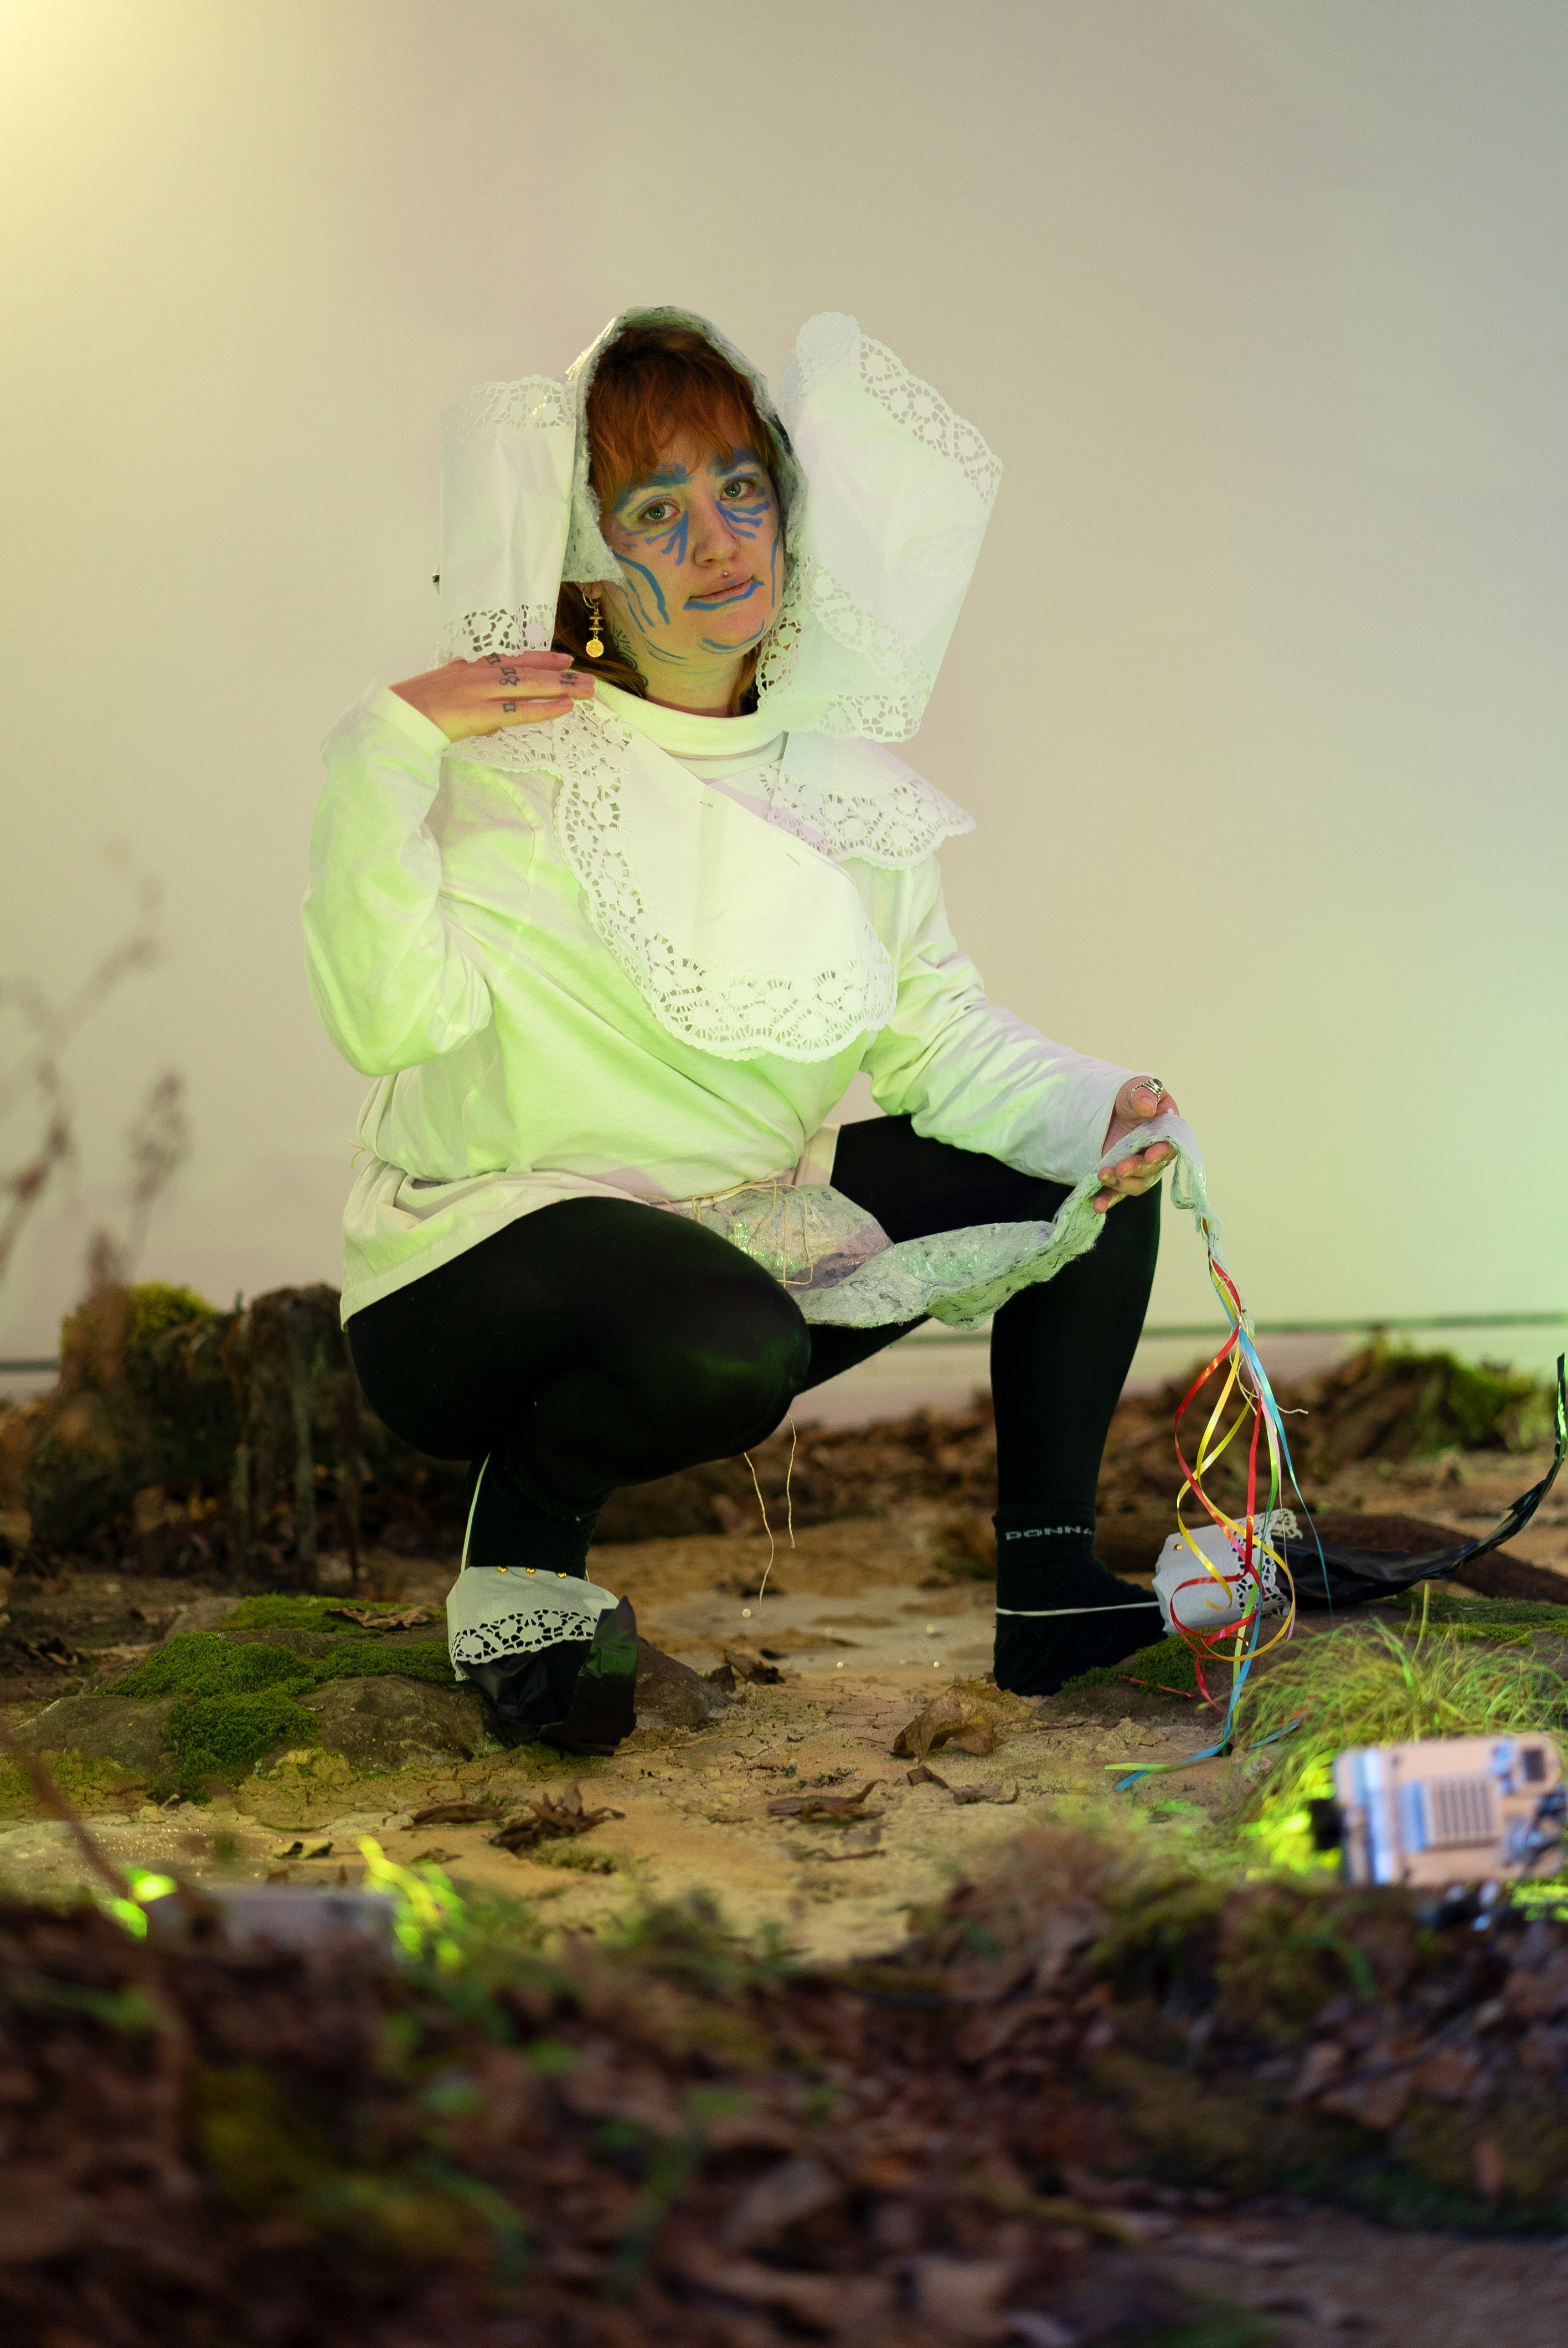 The photo shows a person posing in a squatting position. They are wearing a headdress and a top made of white lace, black leggings and homemade goblin shoes made of black gaffer and white lace. They have put their right hand on the right shoulder and look directly into the camera. The person's body is illuminated by a green light on the ground. The ground is an artificial swamp, which consists of soil, moss, dried leaves and grass. The background is a white wall.